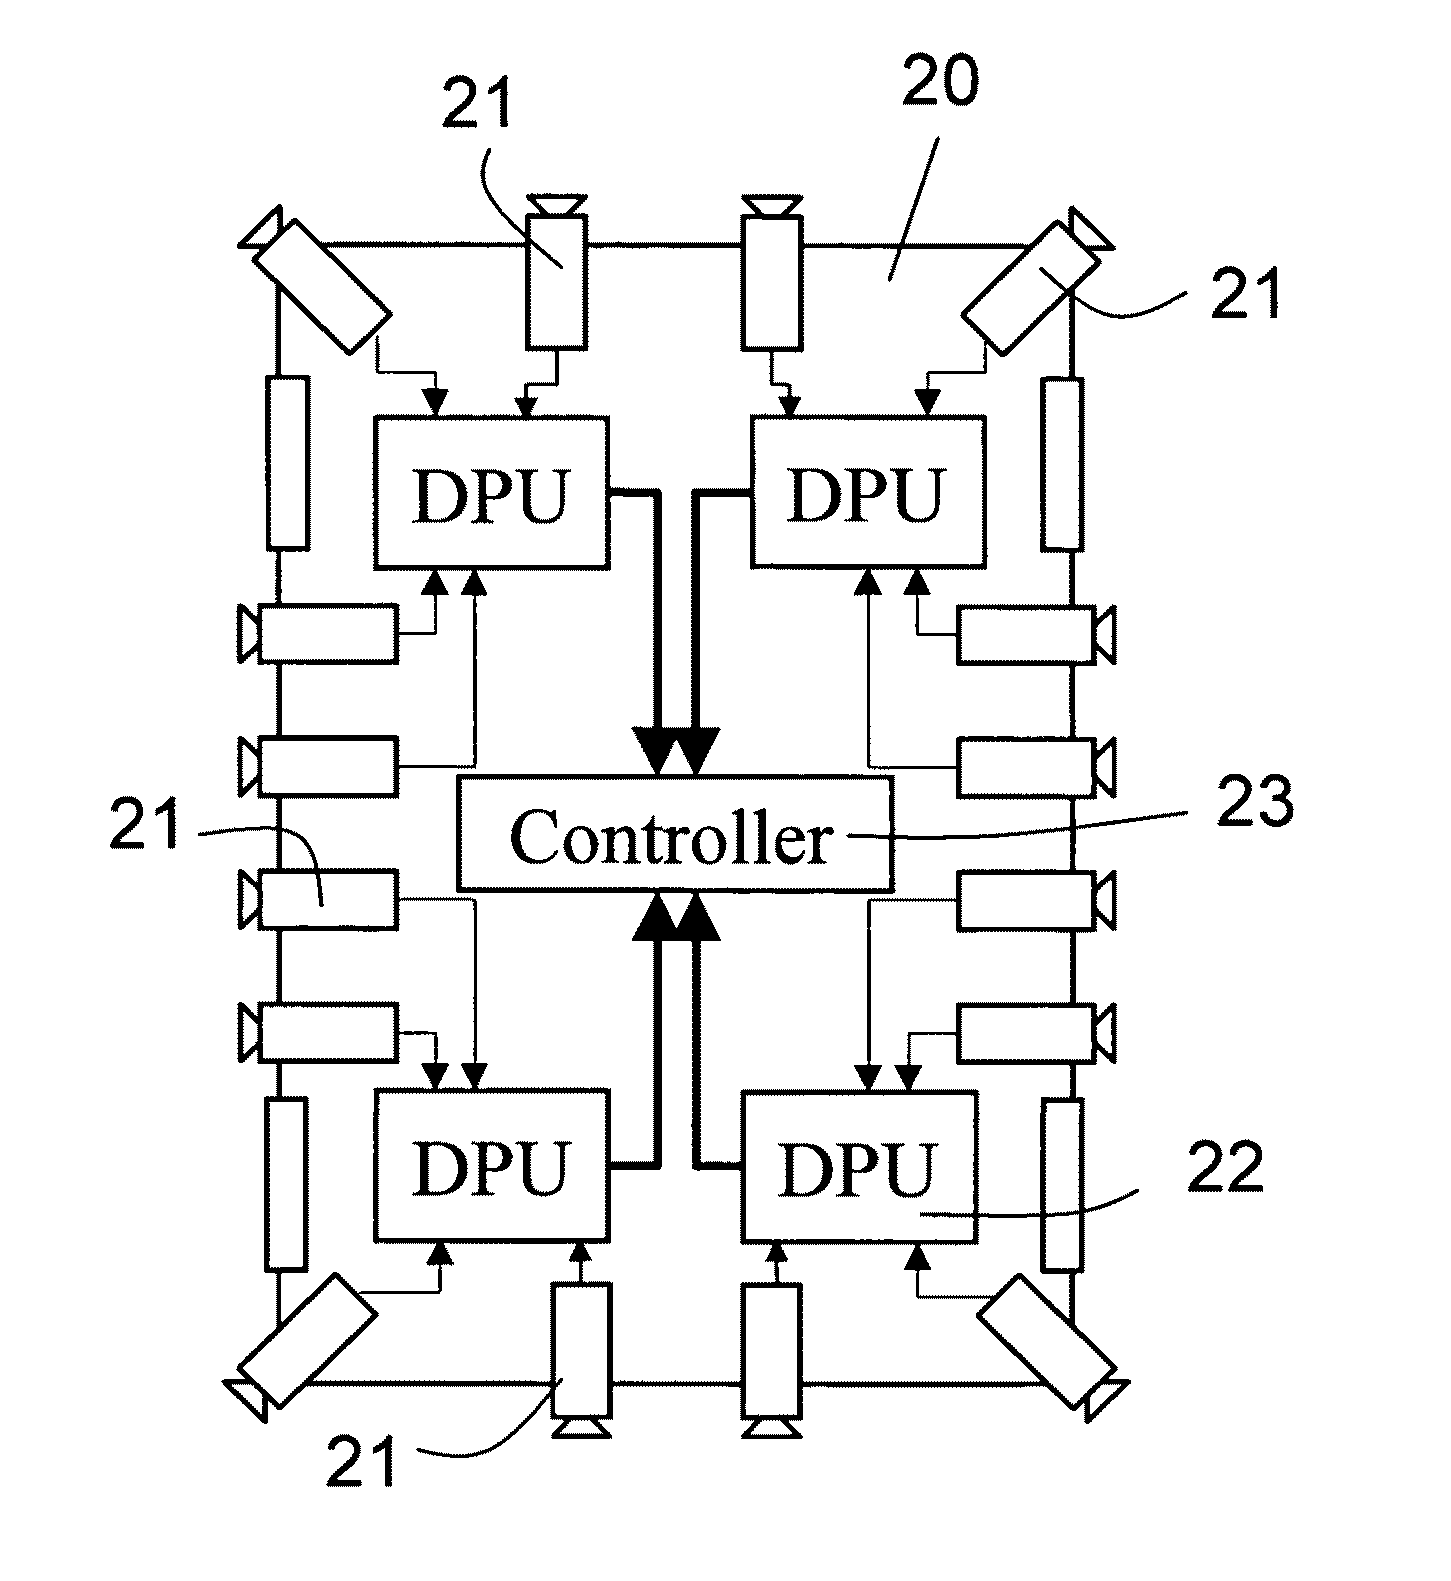 Driving support system with plural dimension processing units